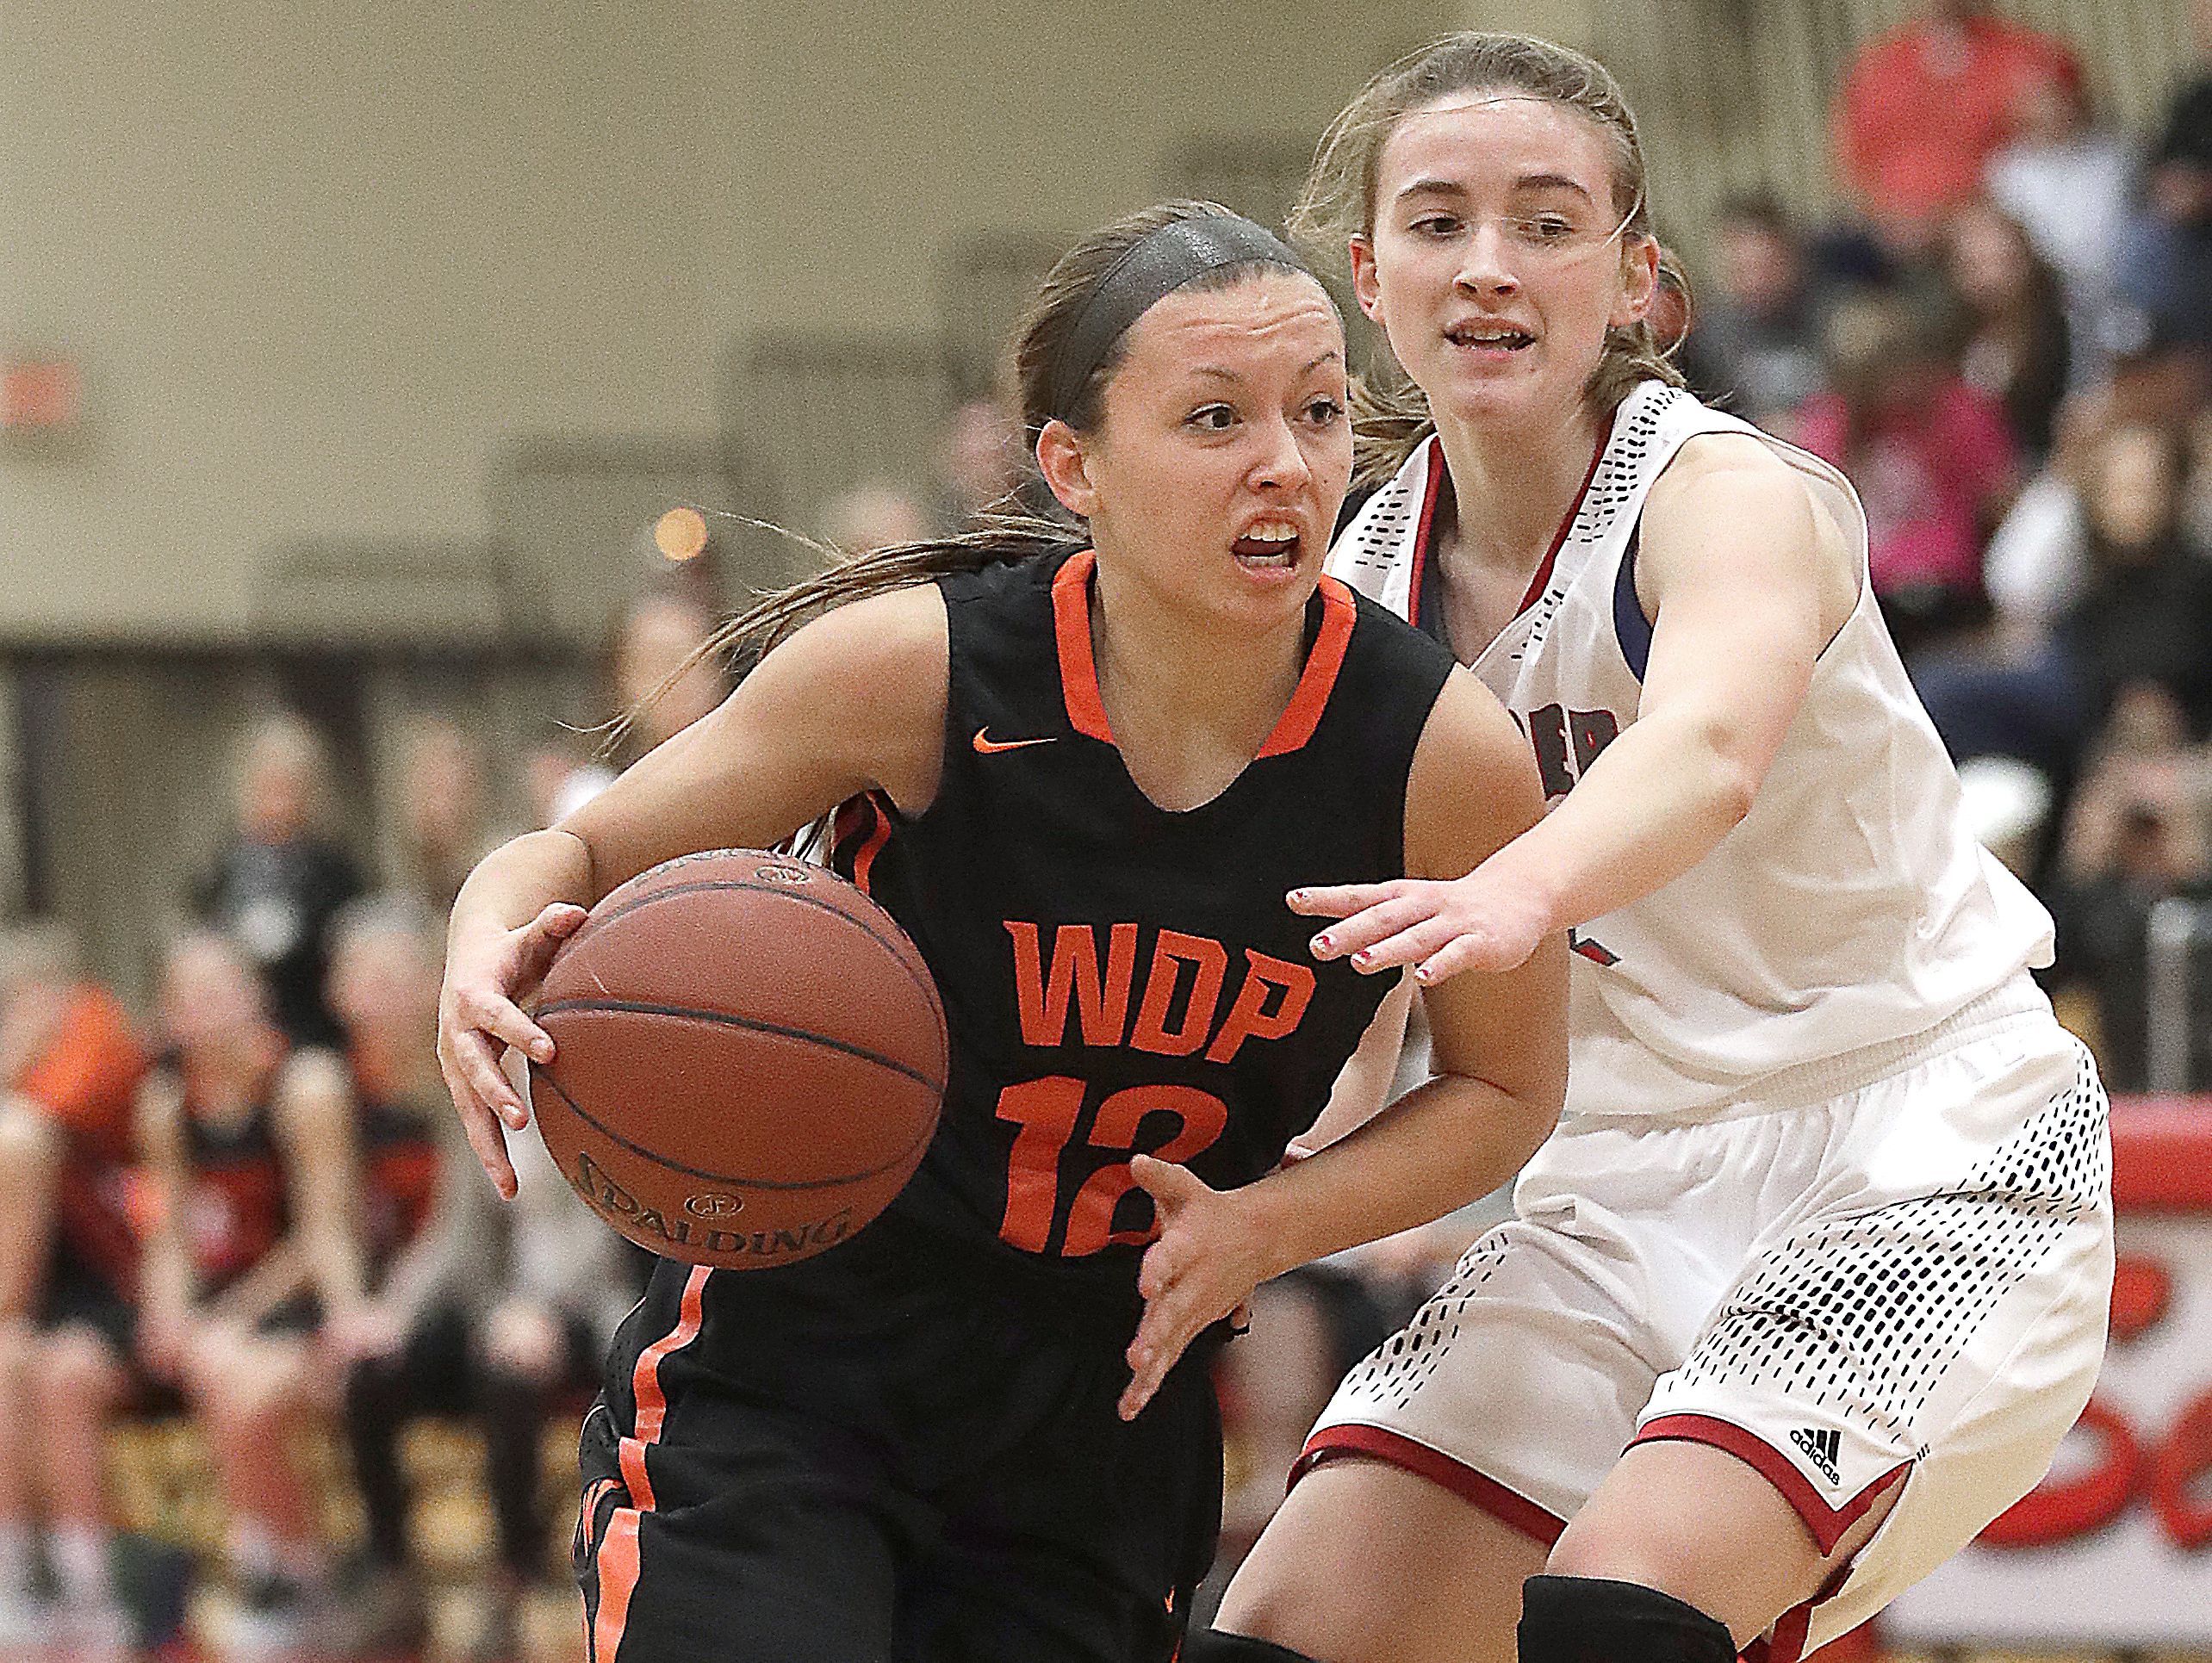 West De Pere senior Liz Edinger earned Bay Conference player of the year honors for a second straight season and finishes her prep career as the Phantoms’ second all-time leading scorer with 1,173 points.